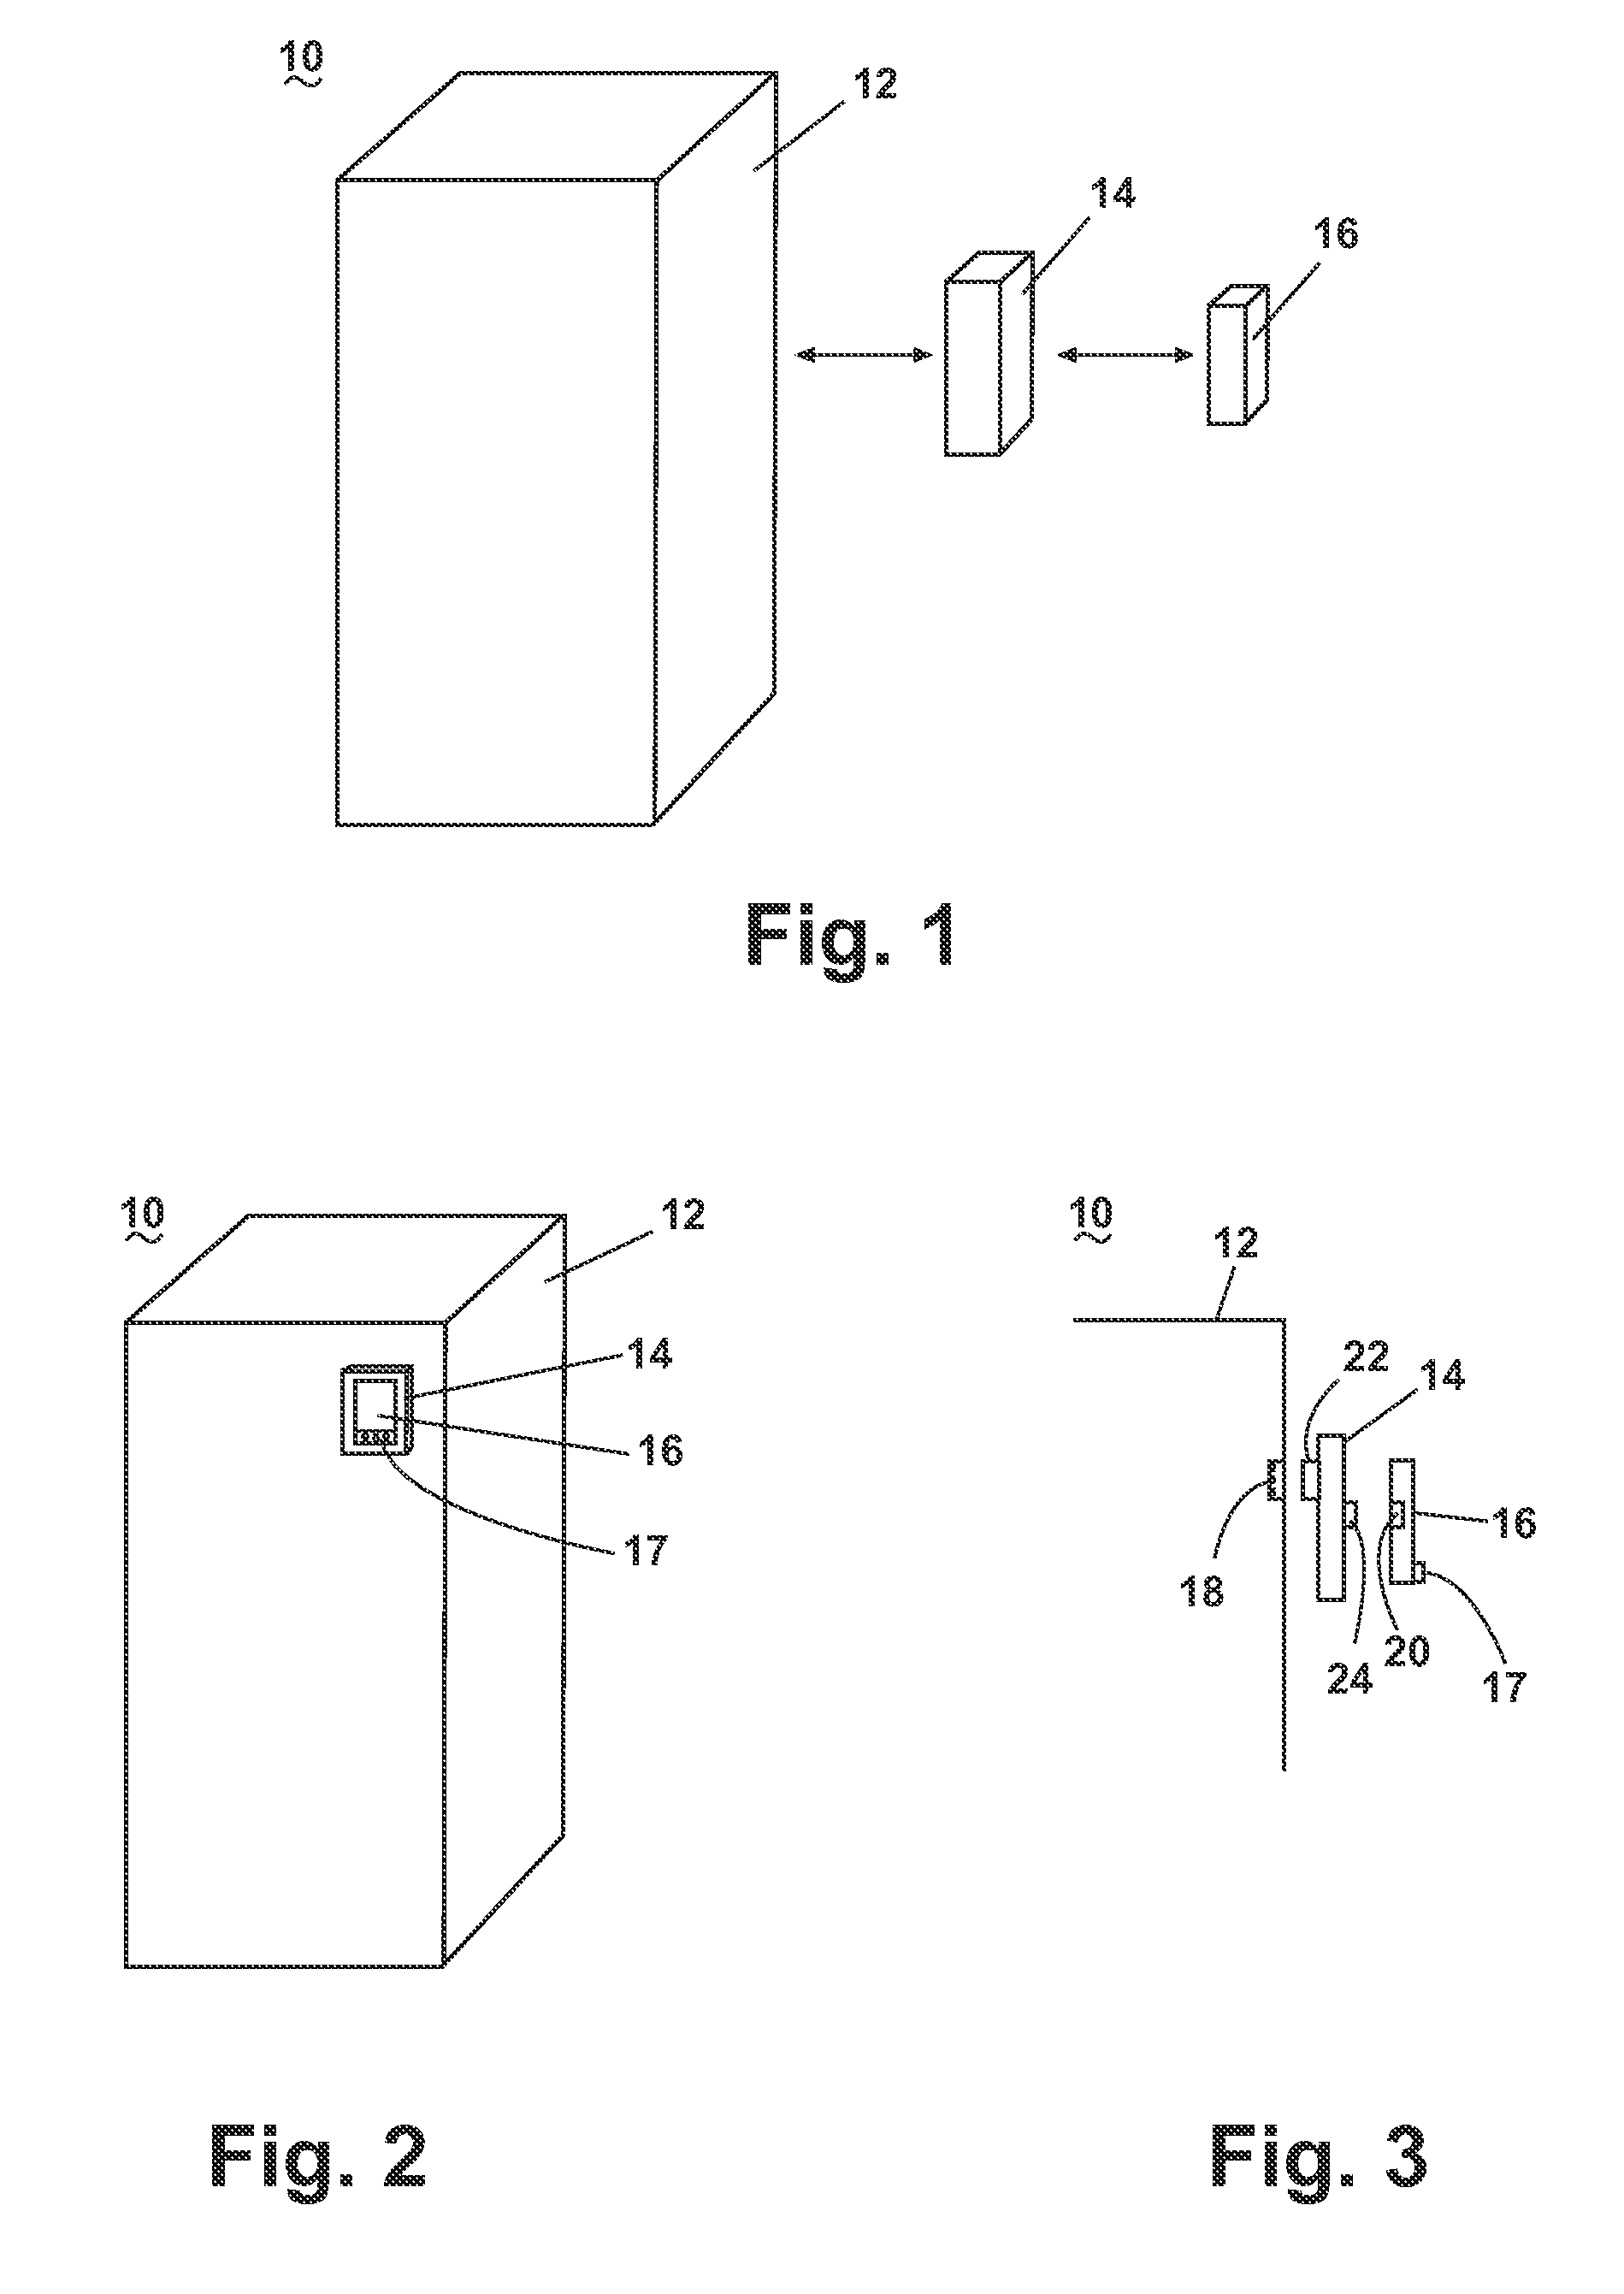 Appliance with an adapter to simultaneously couple multiple consumer electronic devices